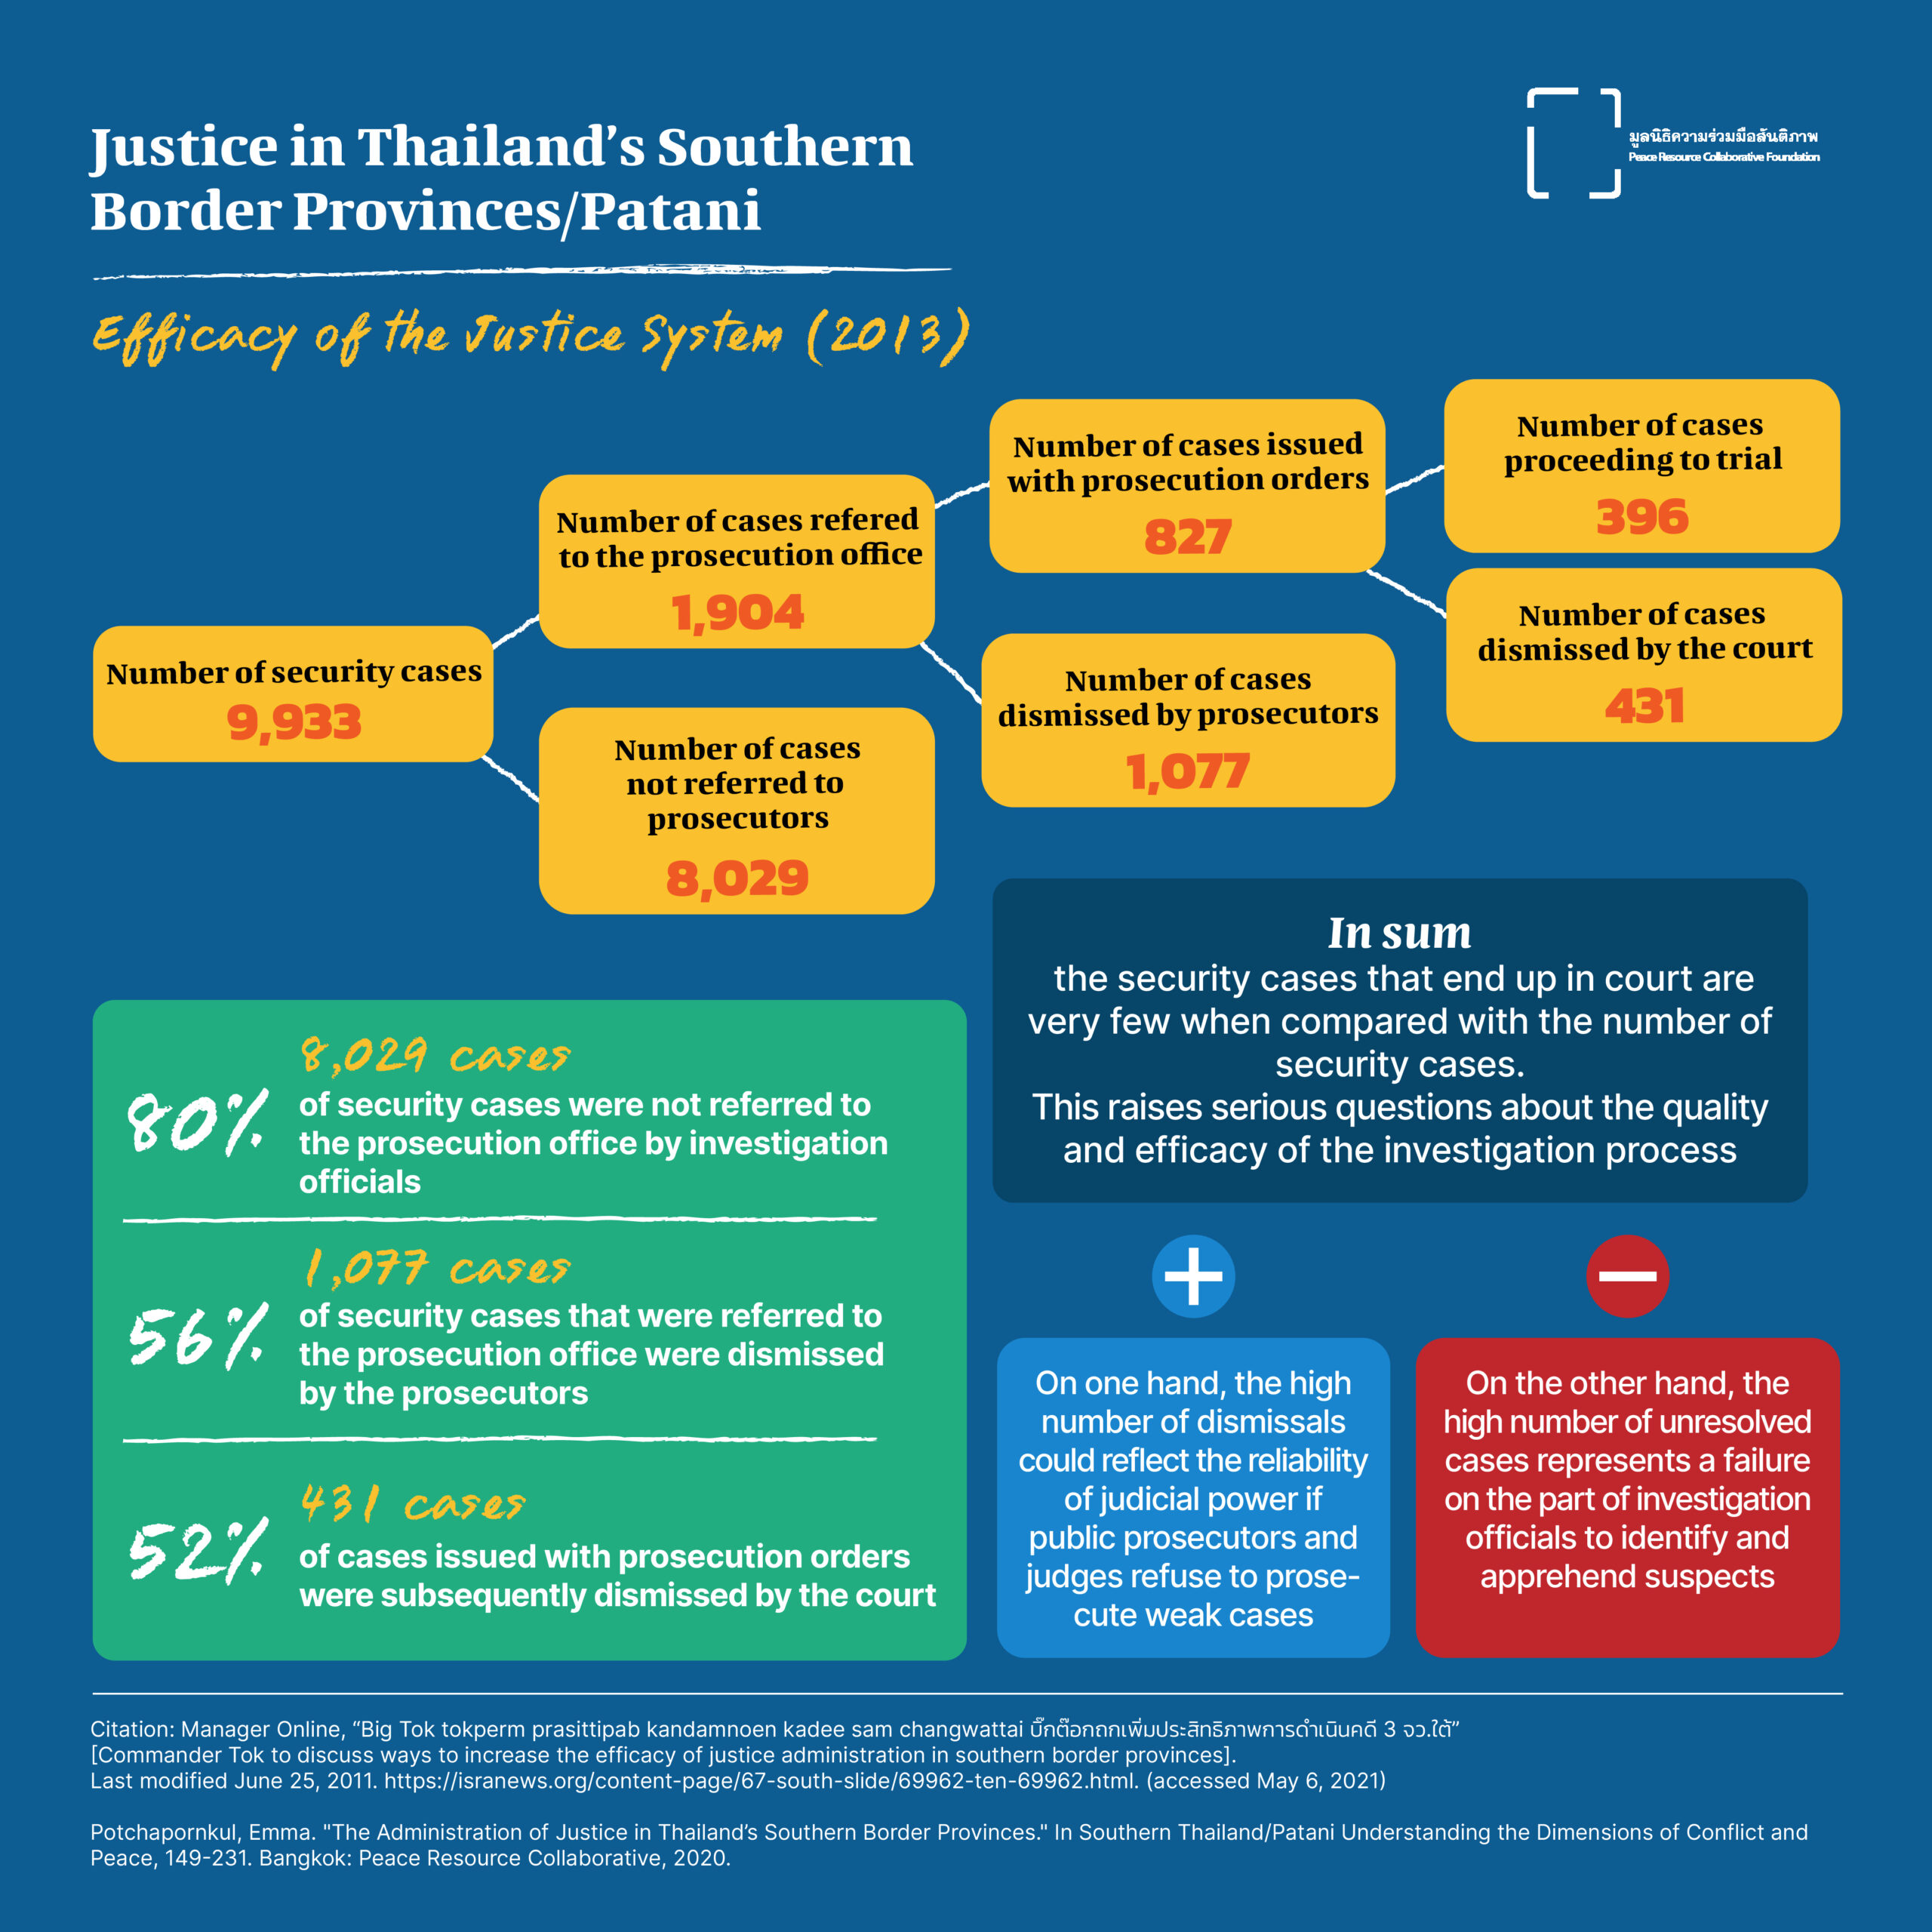 Justice in Thailand's Southern Border Provinces/Patani